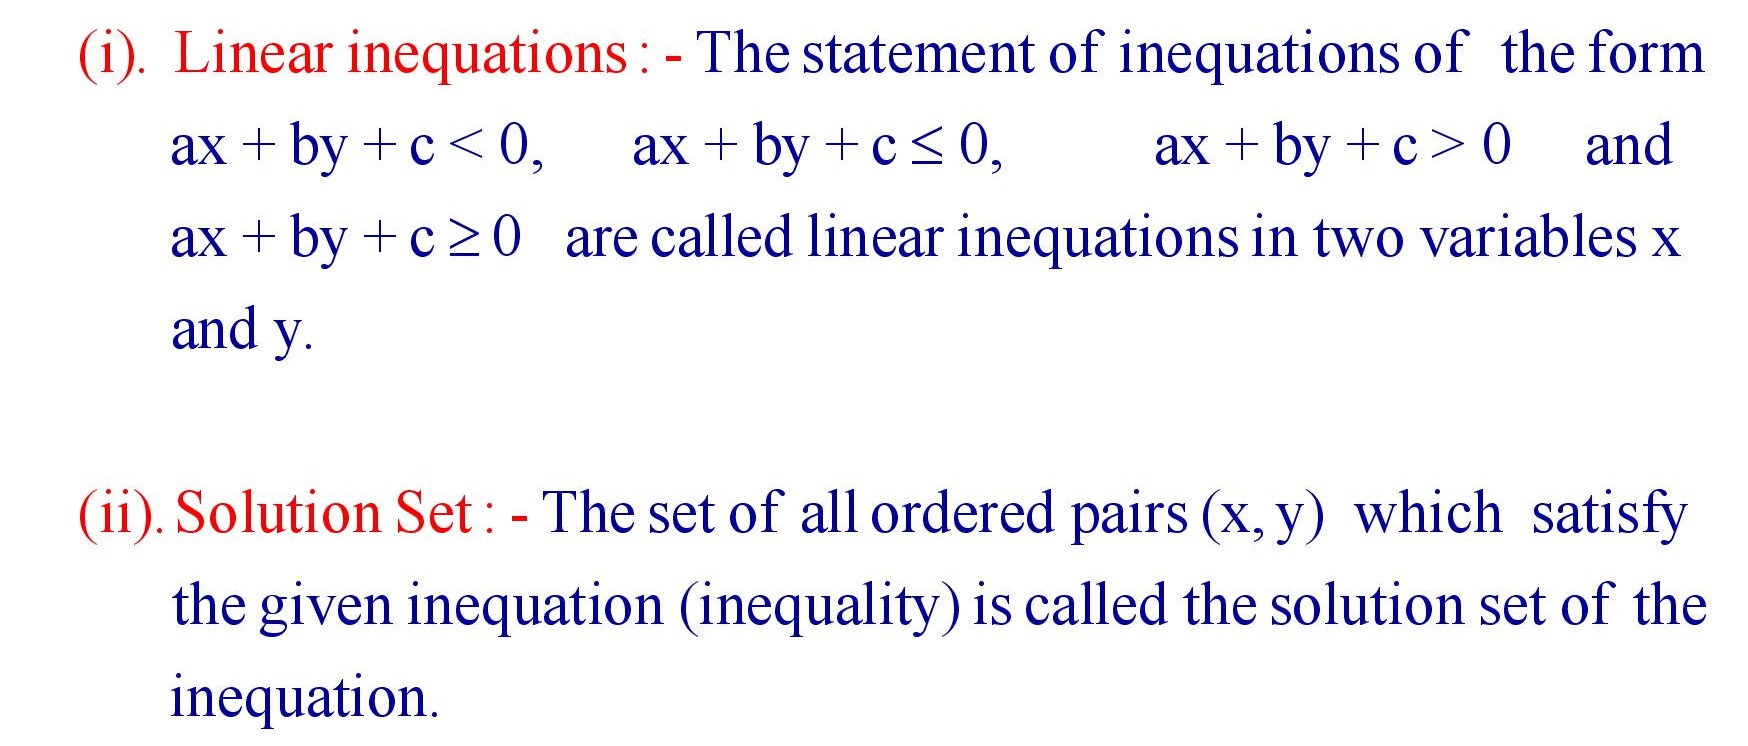 Graphical solution of linear inequations in two variables